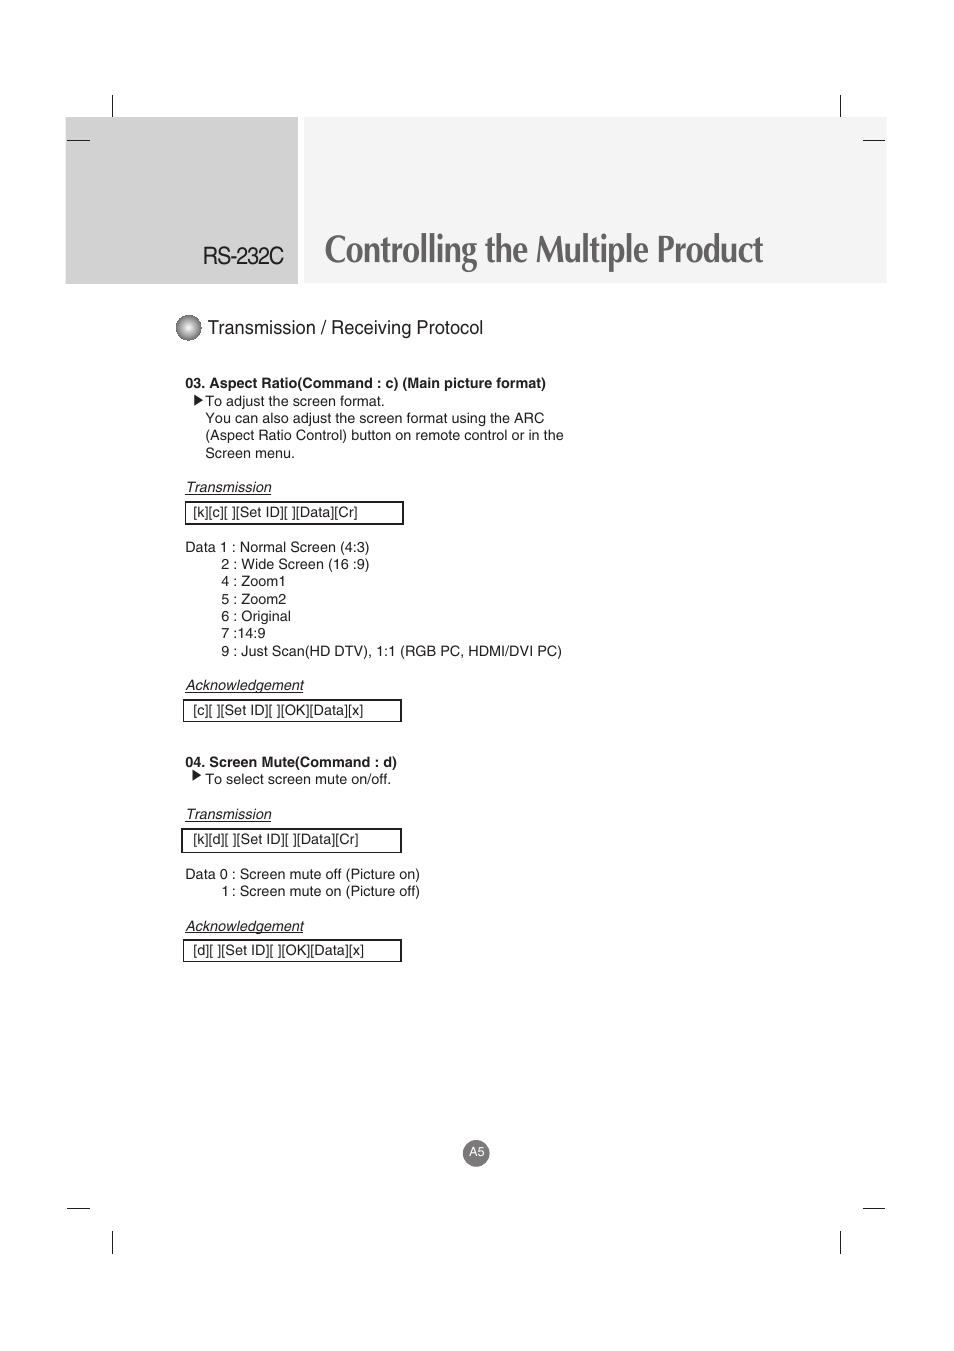 Controlling the multiple product, Rs-232c, Transmission / receiving protocol | LG M3202C-BA User Manual | Page 45 / 68